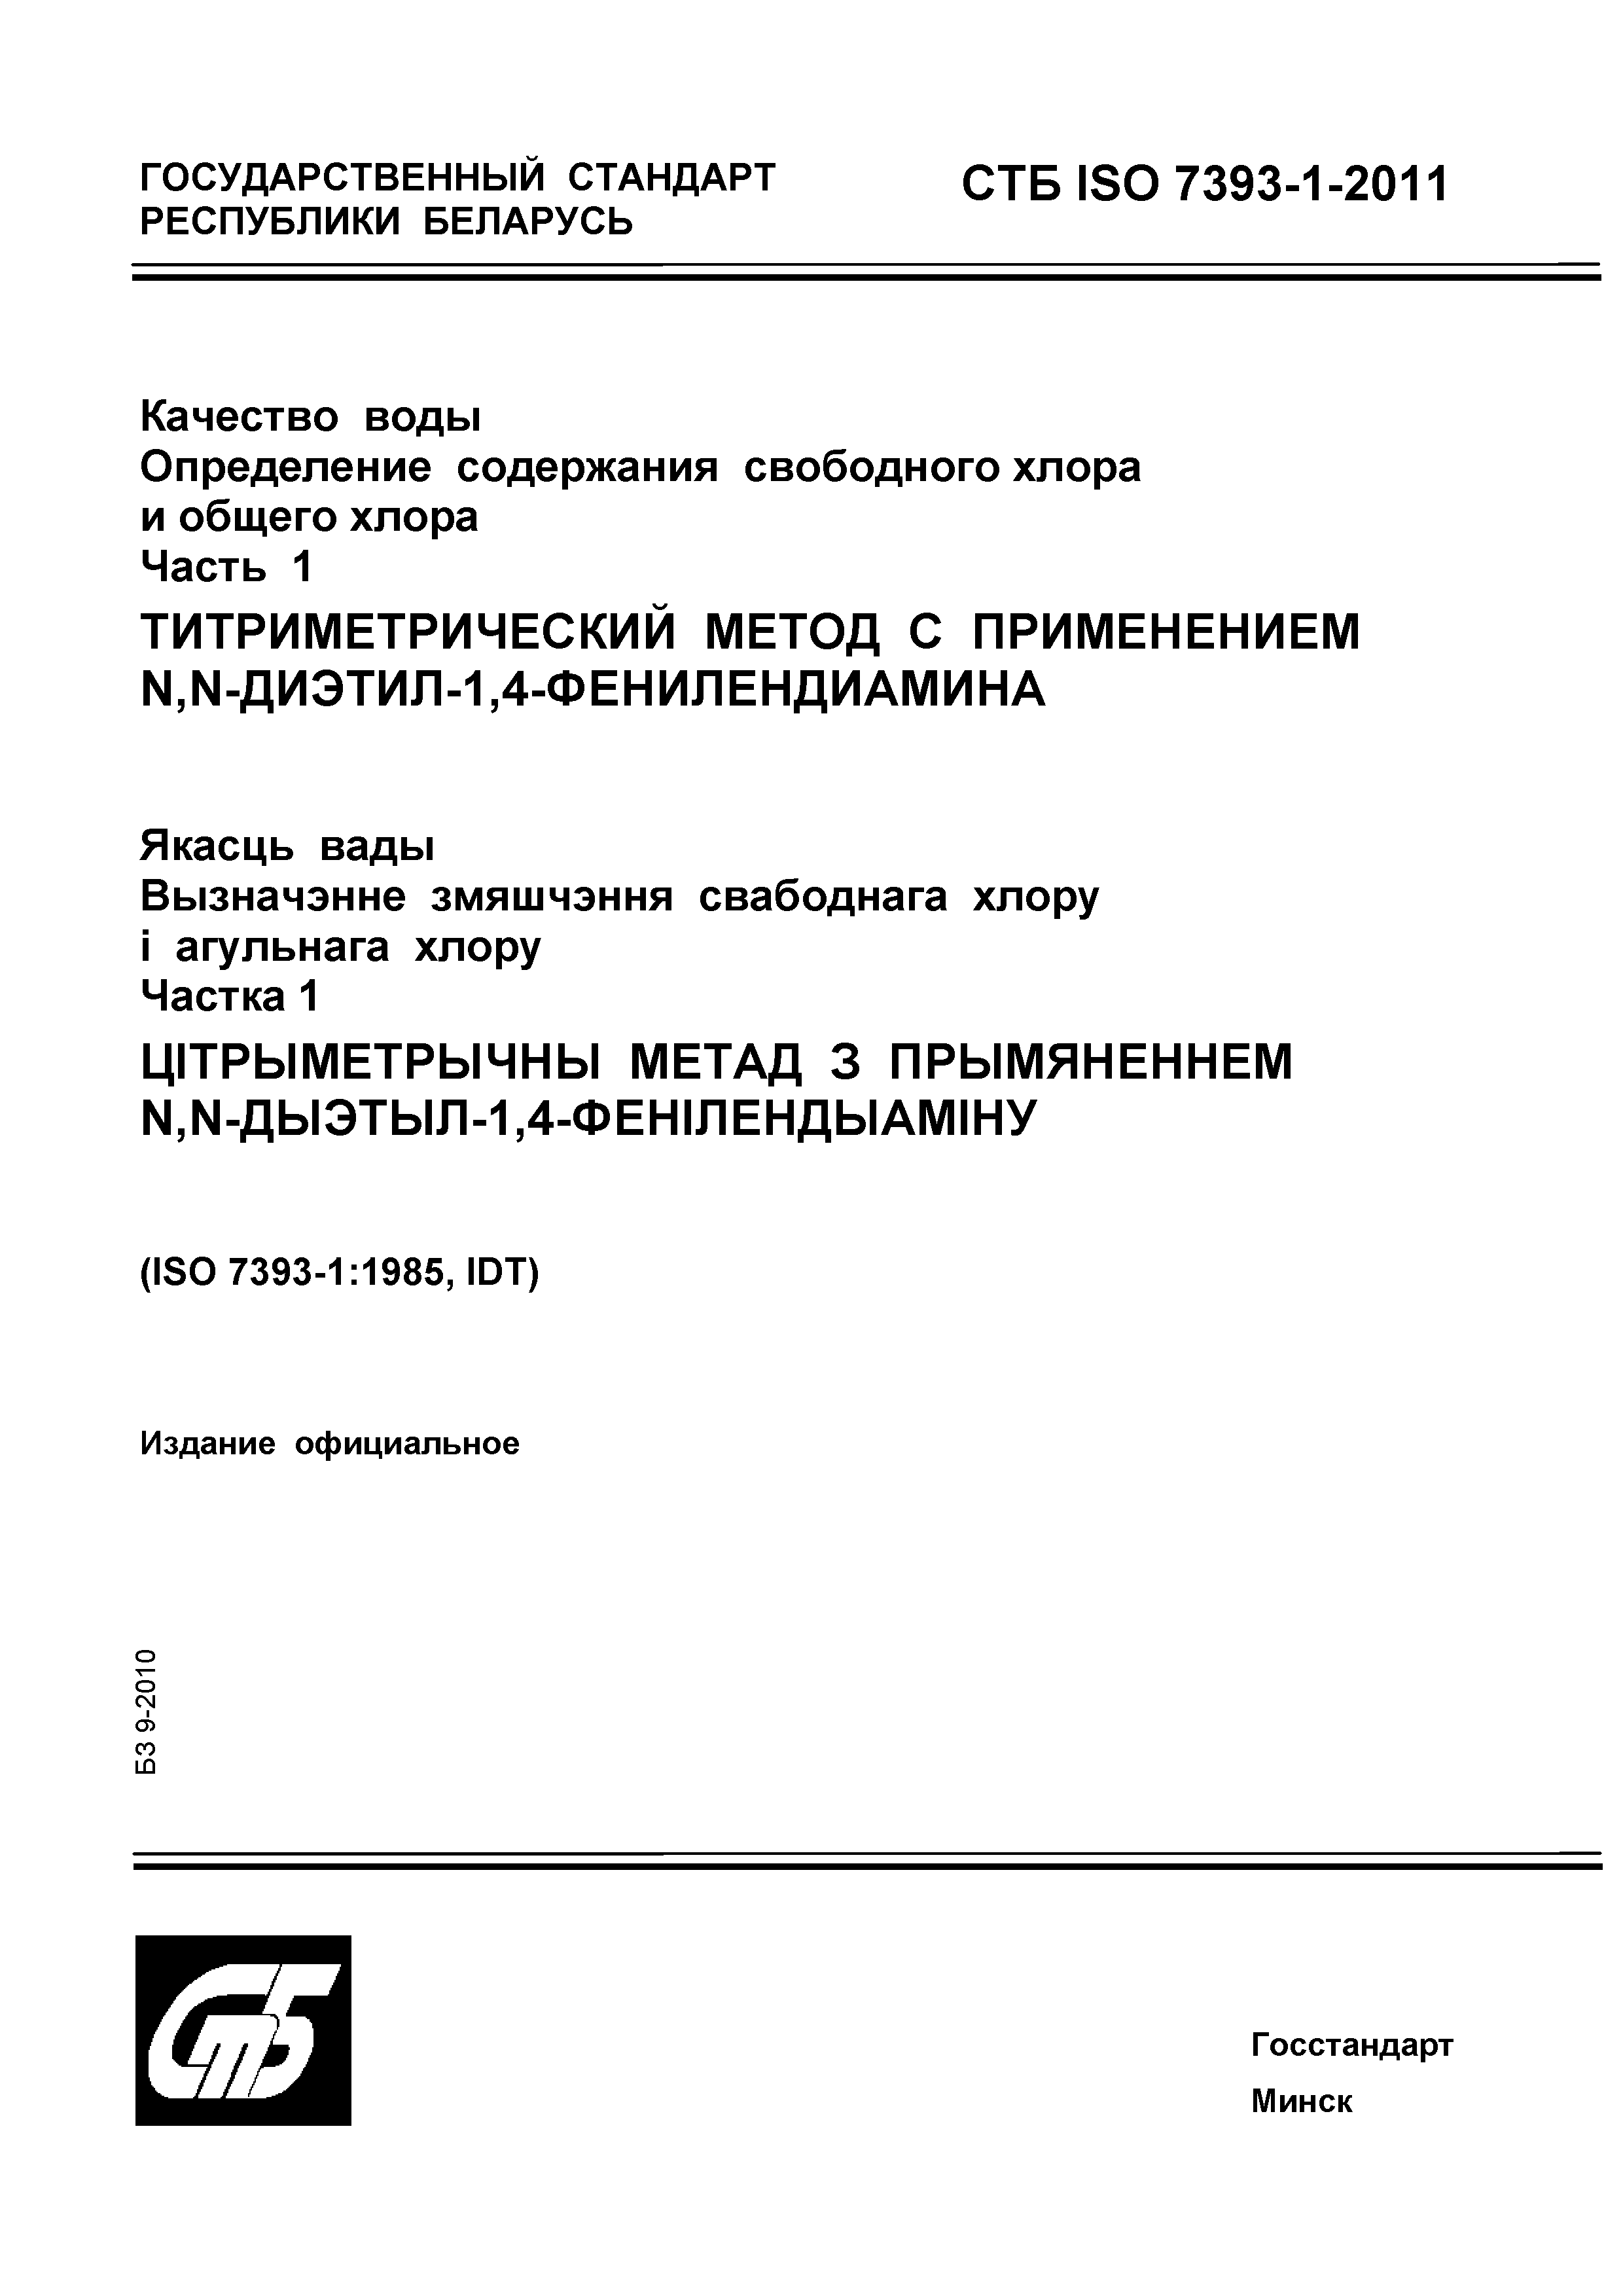 СТБ ISO 7393-1-2011